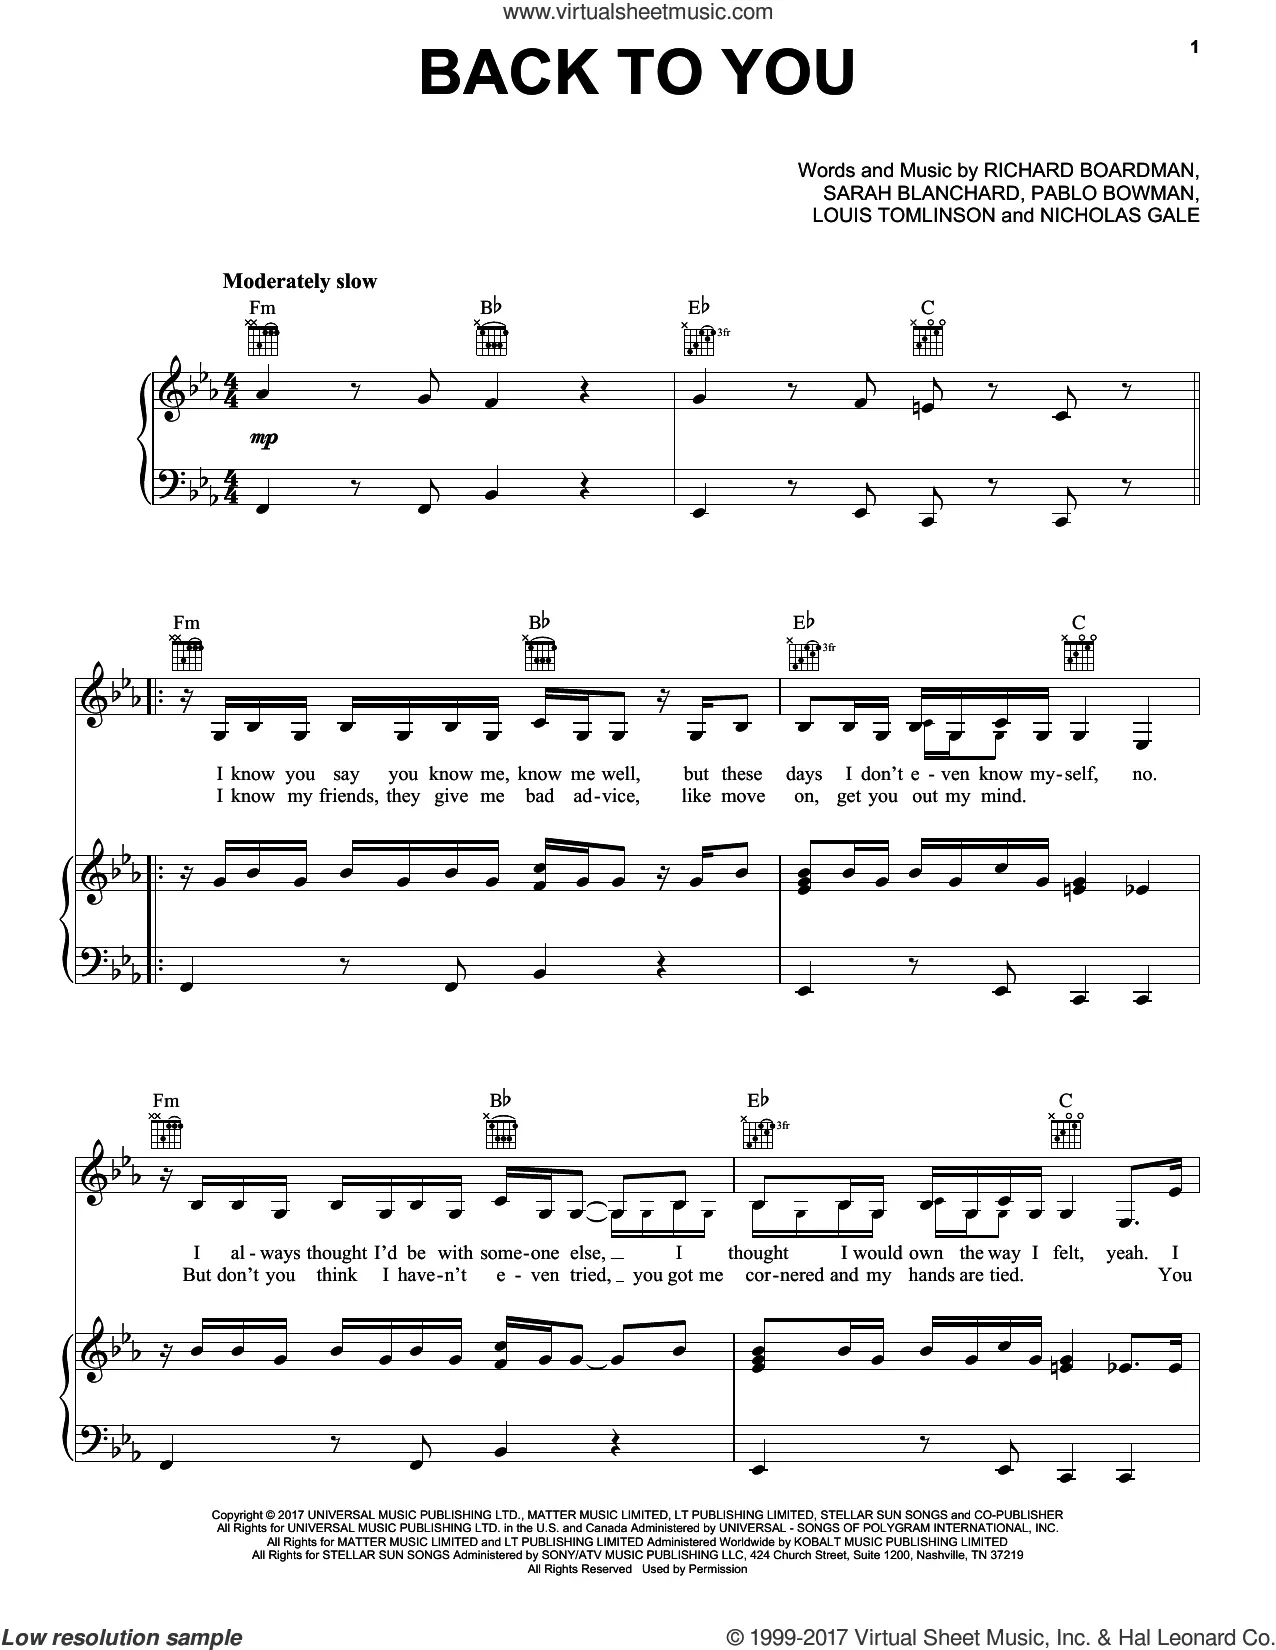 Two of Us (Intermediate Piano) By Louis Tomlinson - F.M. Sheet